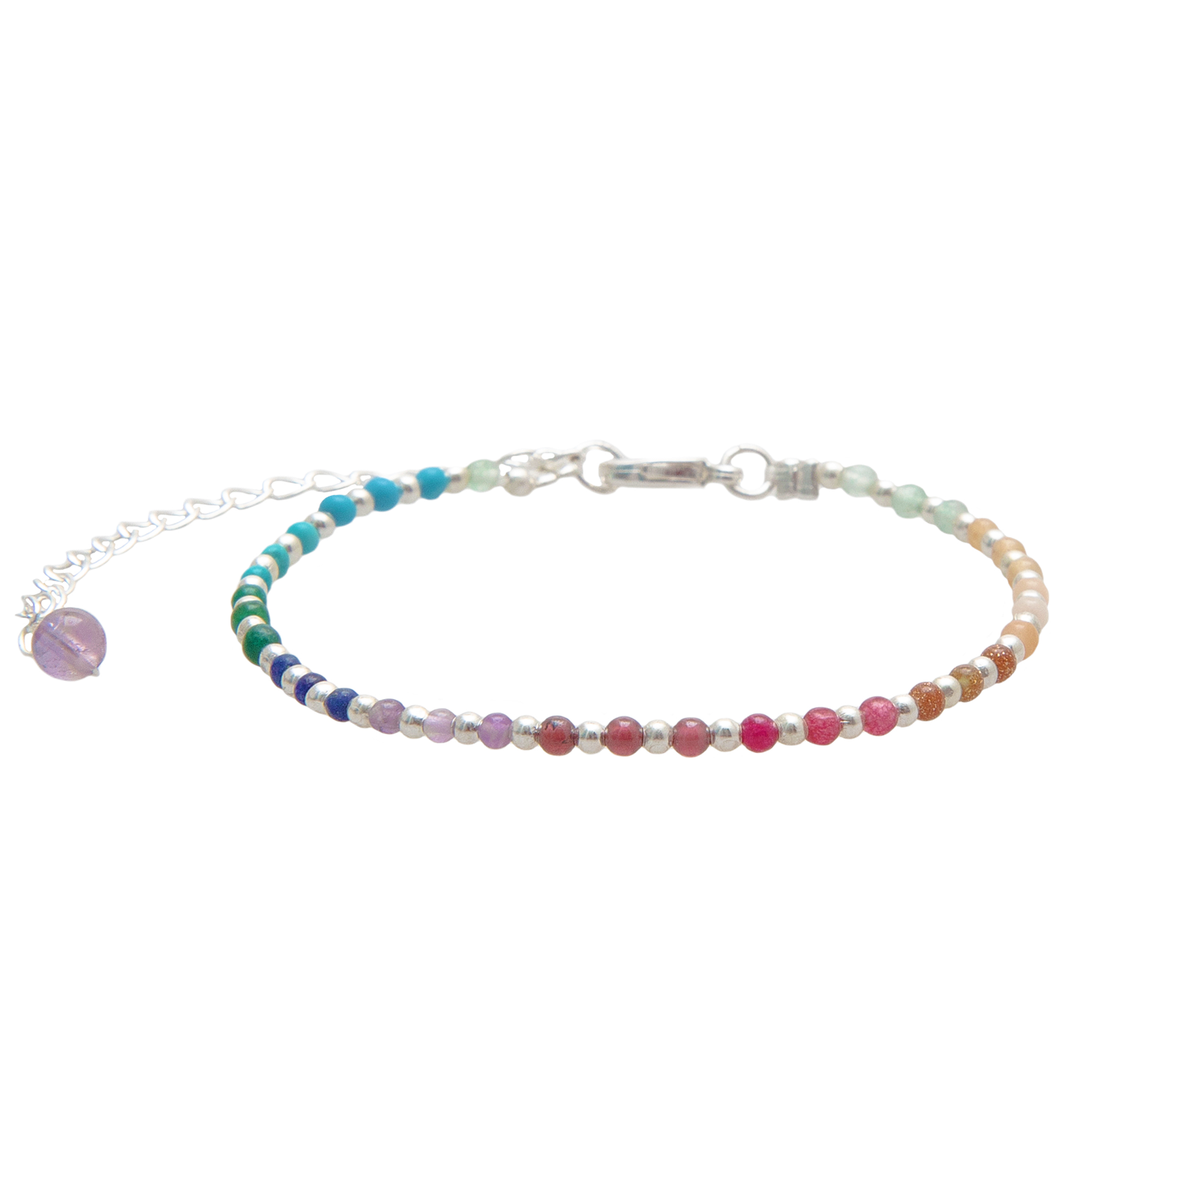 2mm multicolor stone and silver bead healing bracelet on a silver chain